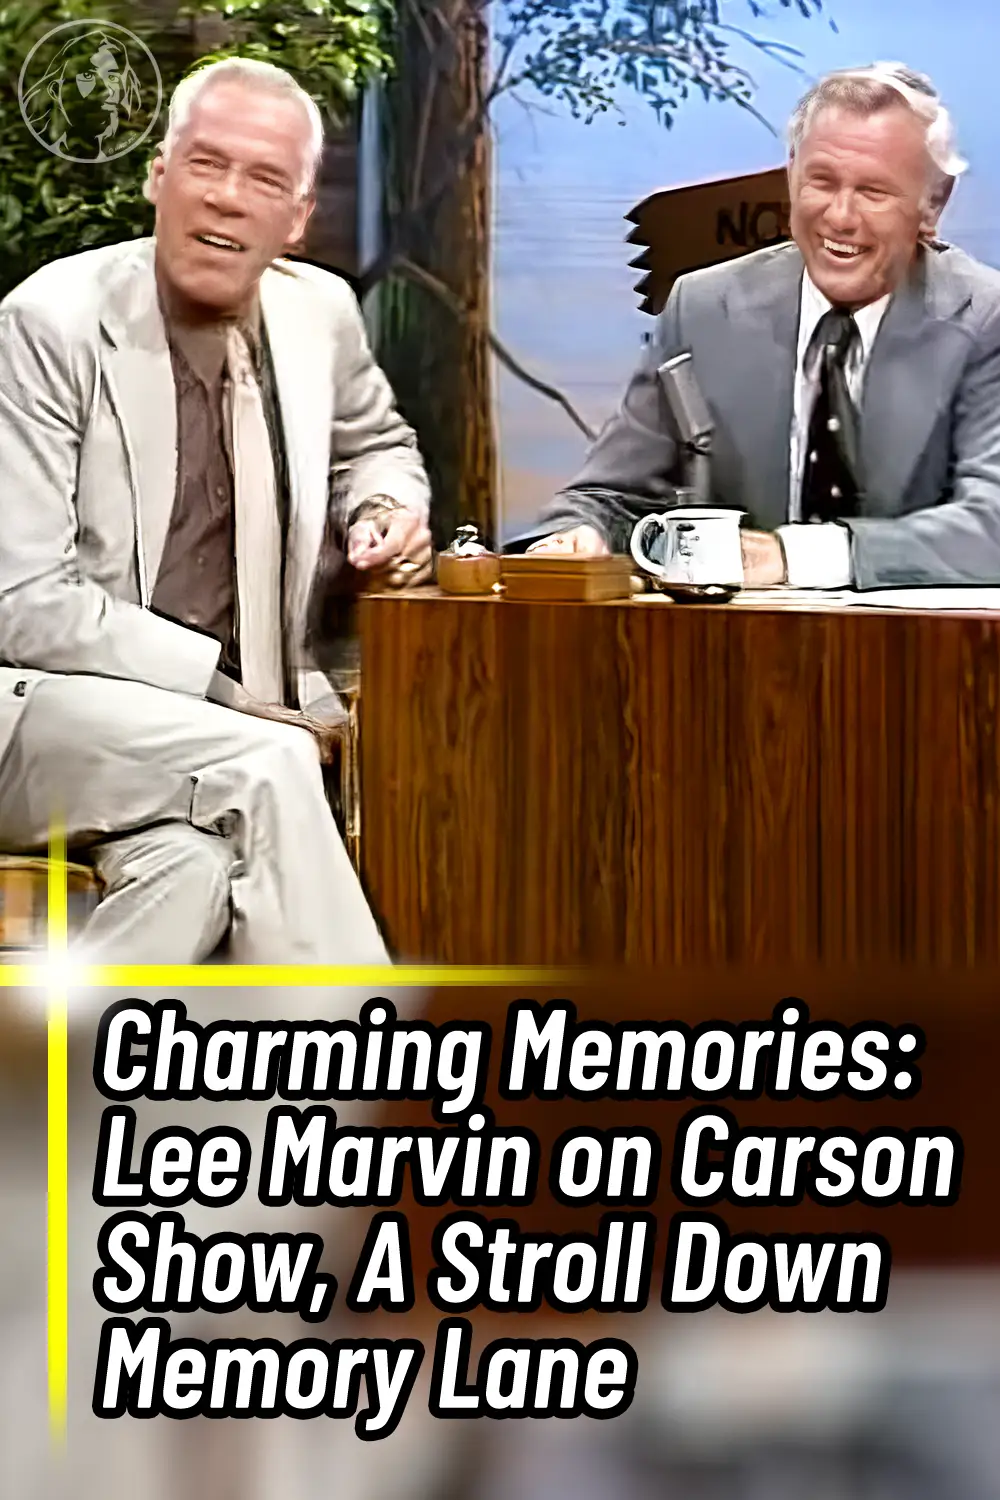 Charming Memories: Lee Marvin on Carson Show, A Stroll Down Memory Lane